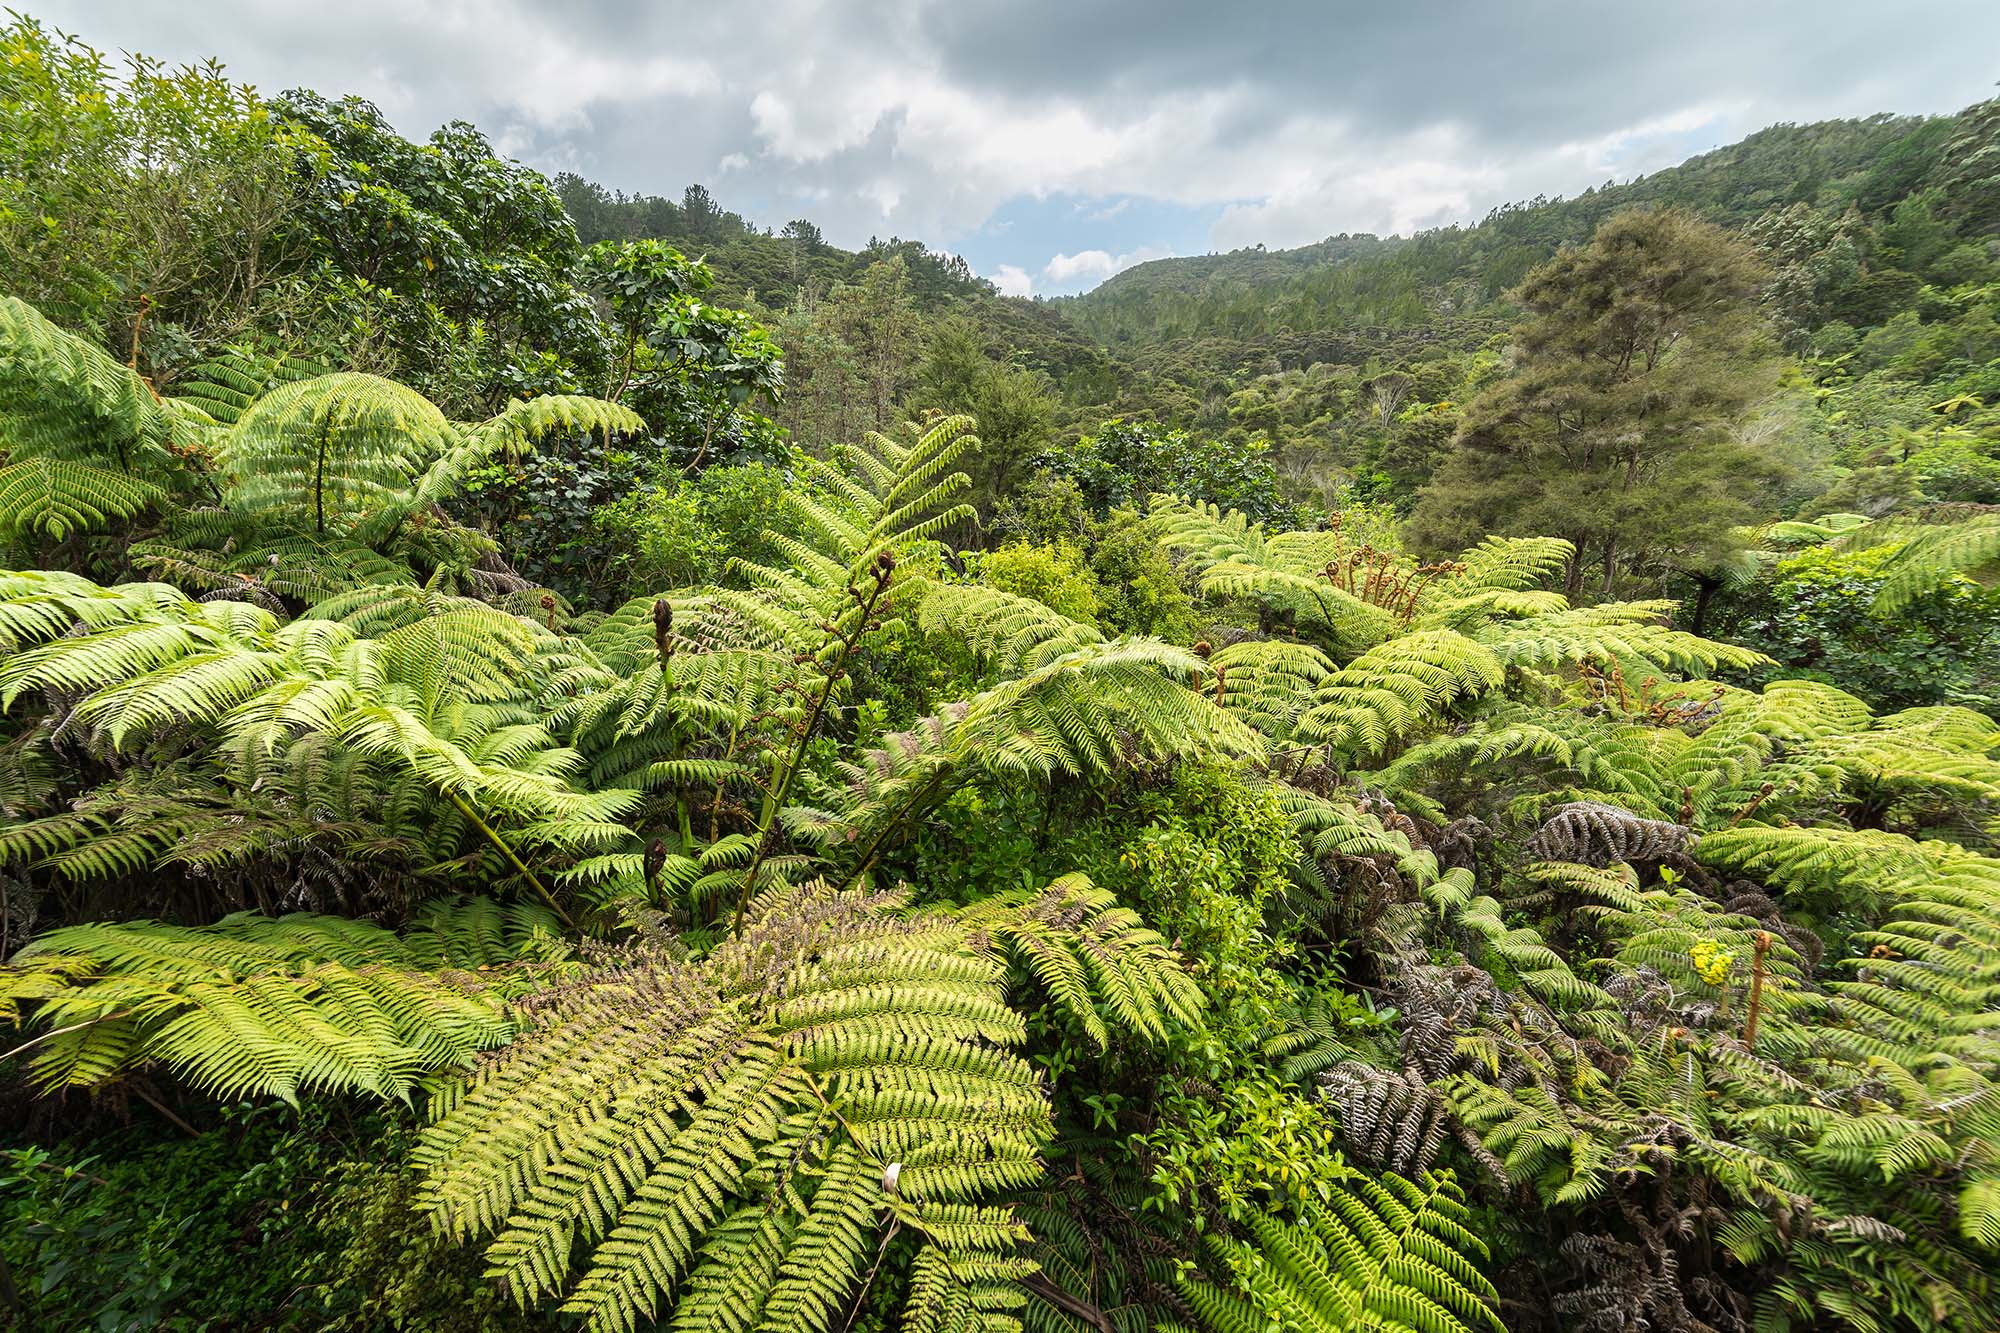 How Trees That Count Is Helping To Reforest New Zealand